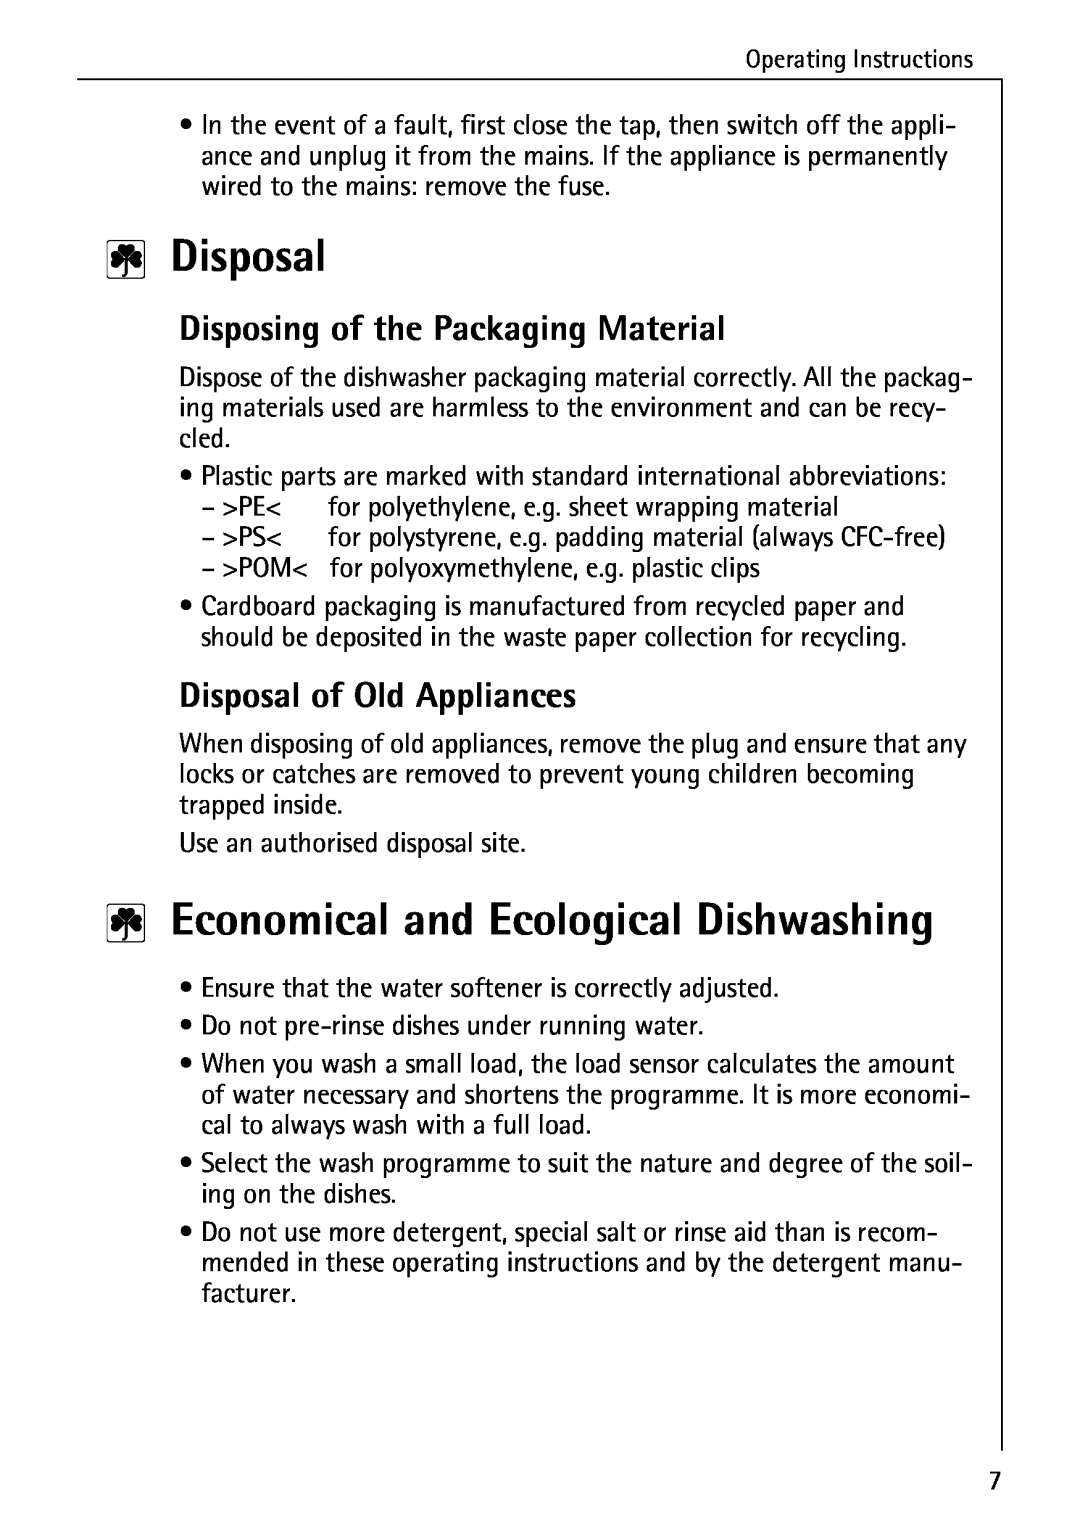 AEG 3A manual Economical and Ecological Dishwashing, Disposing of the Packaging Material, Disposal of Old Appliances 